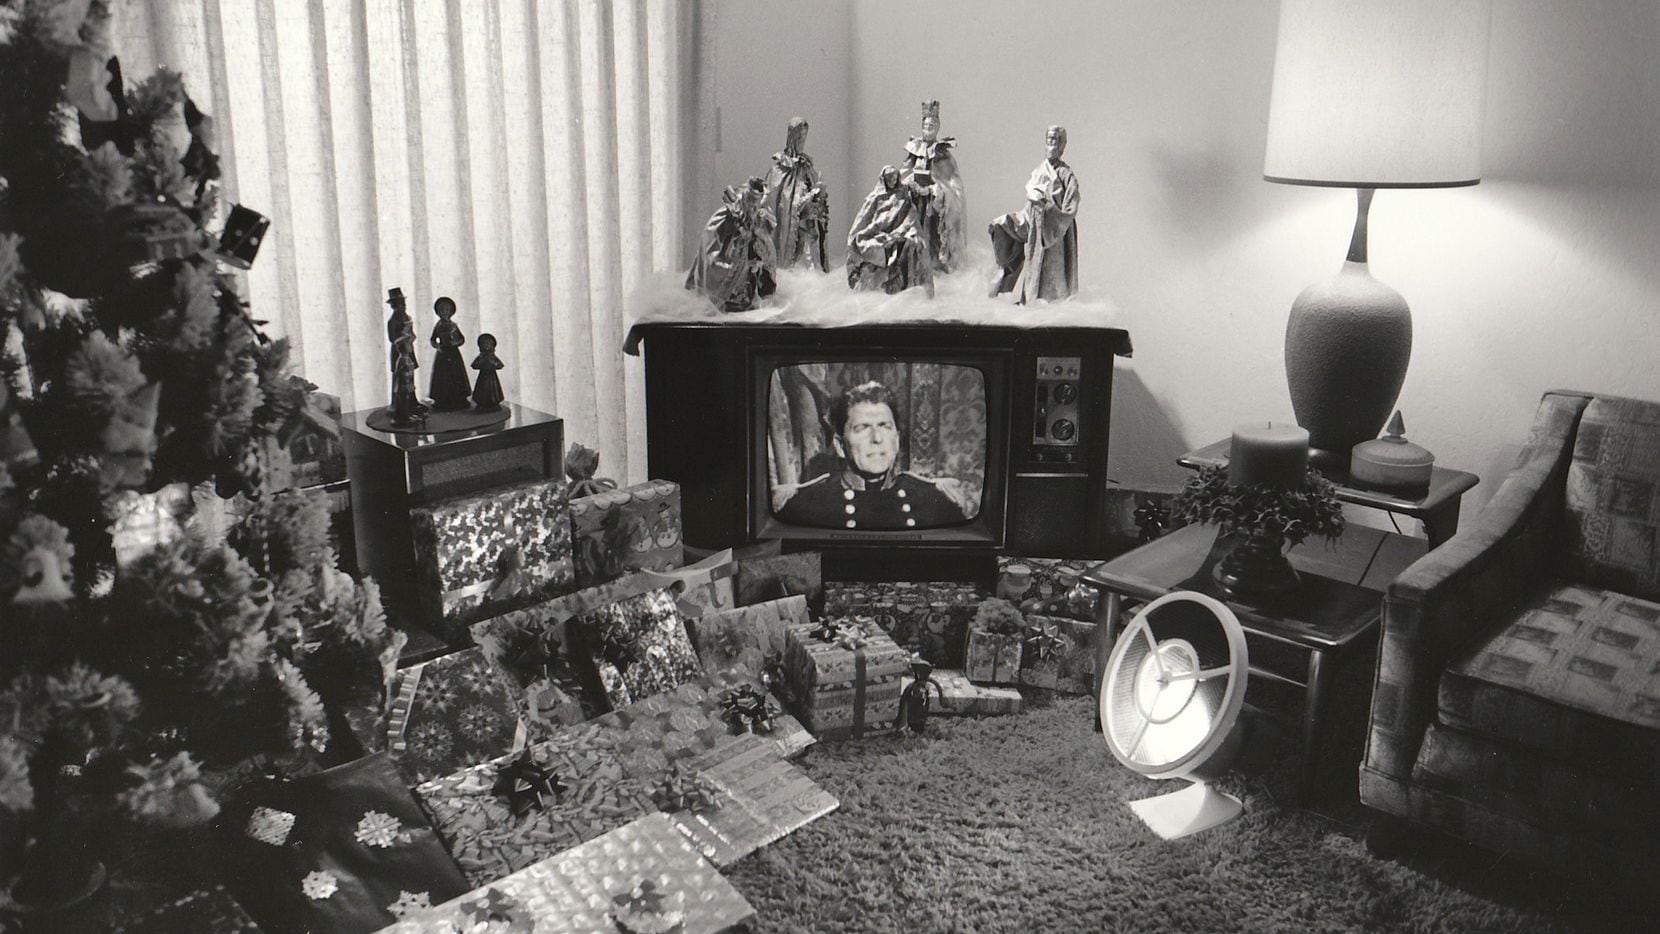 Bill Owens' "Reagan on TV" is on display as part of the "Suburbia" exhibition at Photographs...